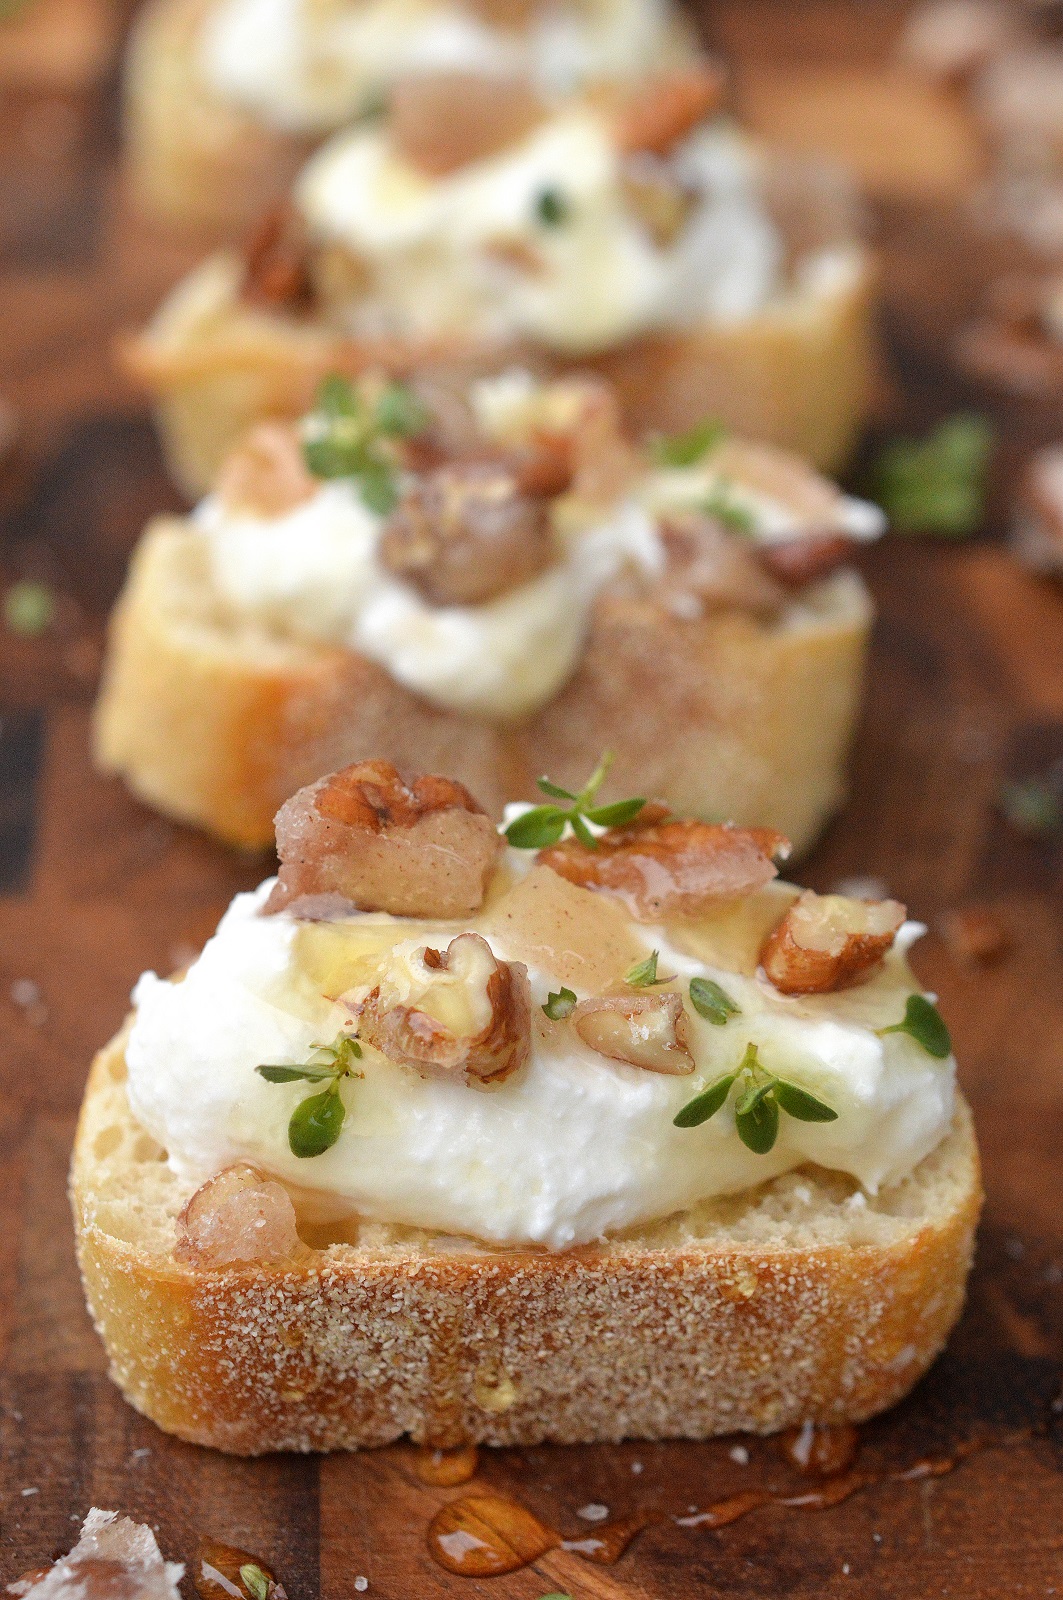 Whipped Ricotta Crostini's Incredible delicious and easy to make, great addition to a cheese board, as an appetizer or a dessert.